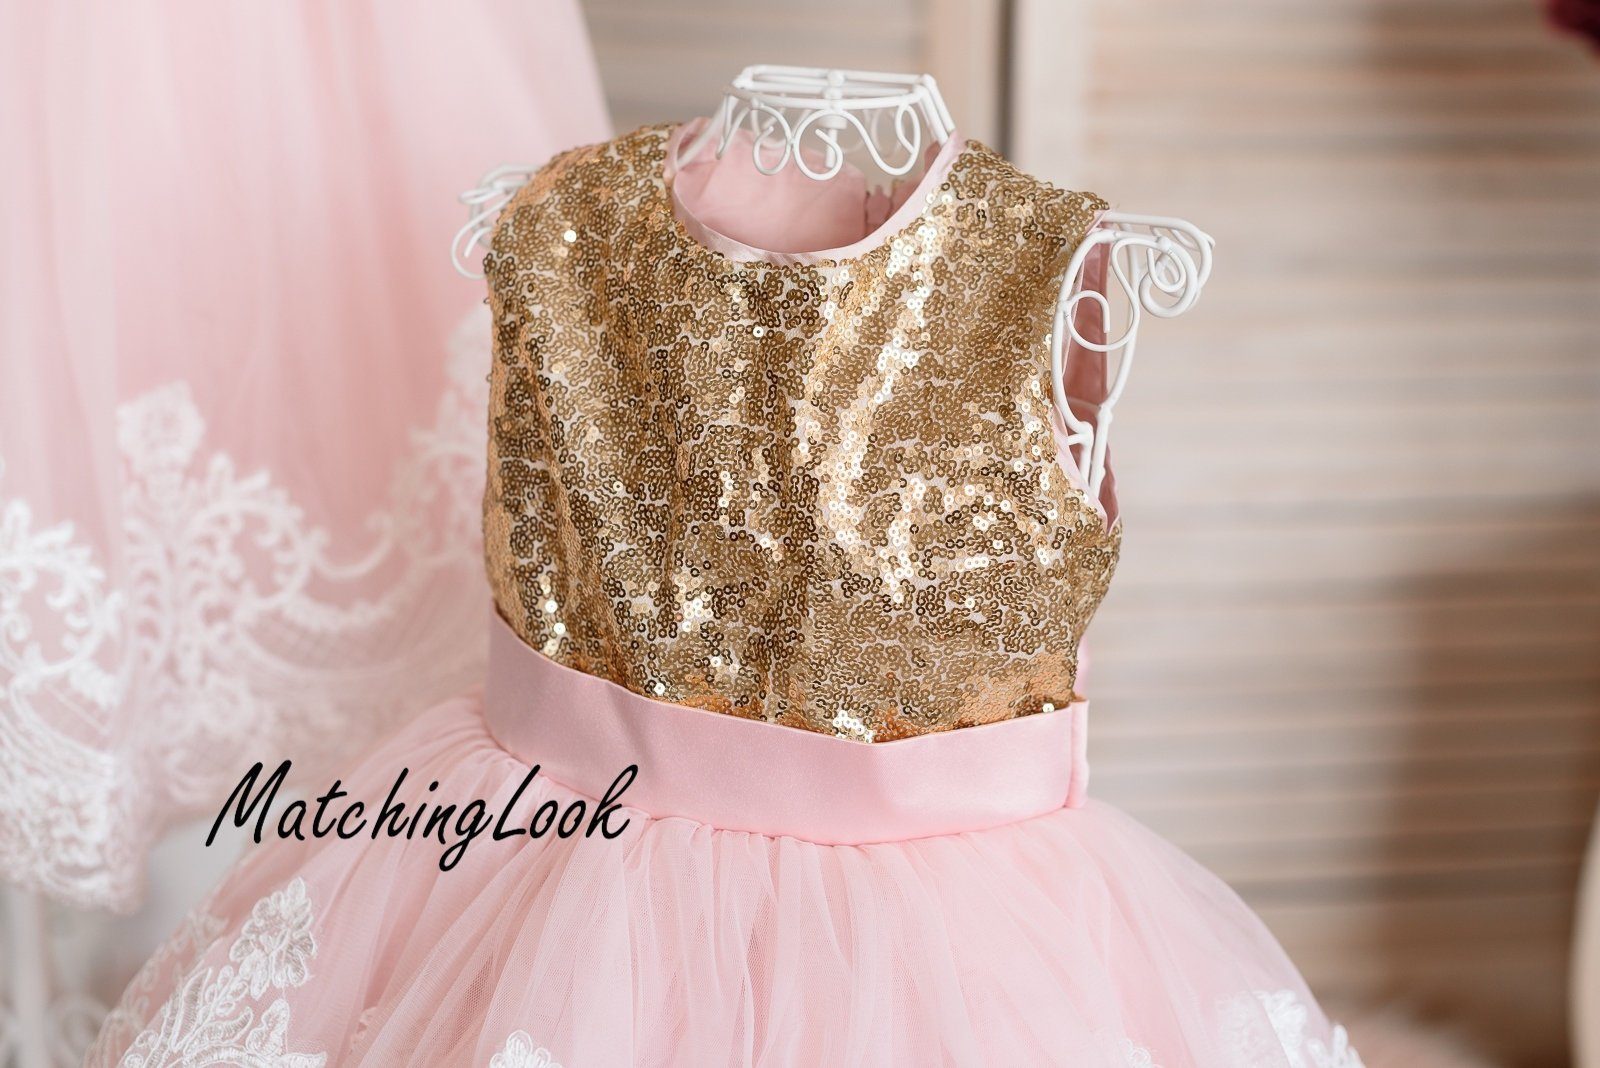 birthday dress for baby and mom